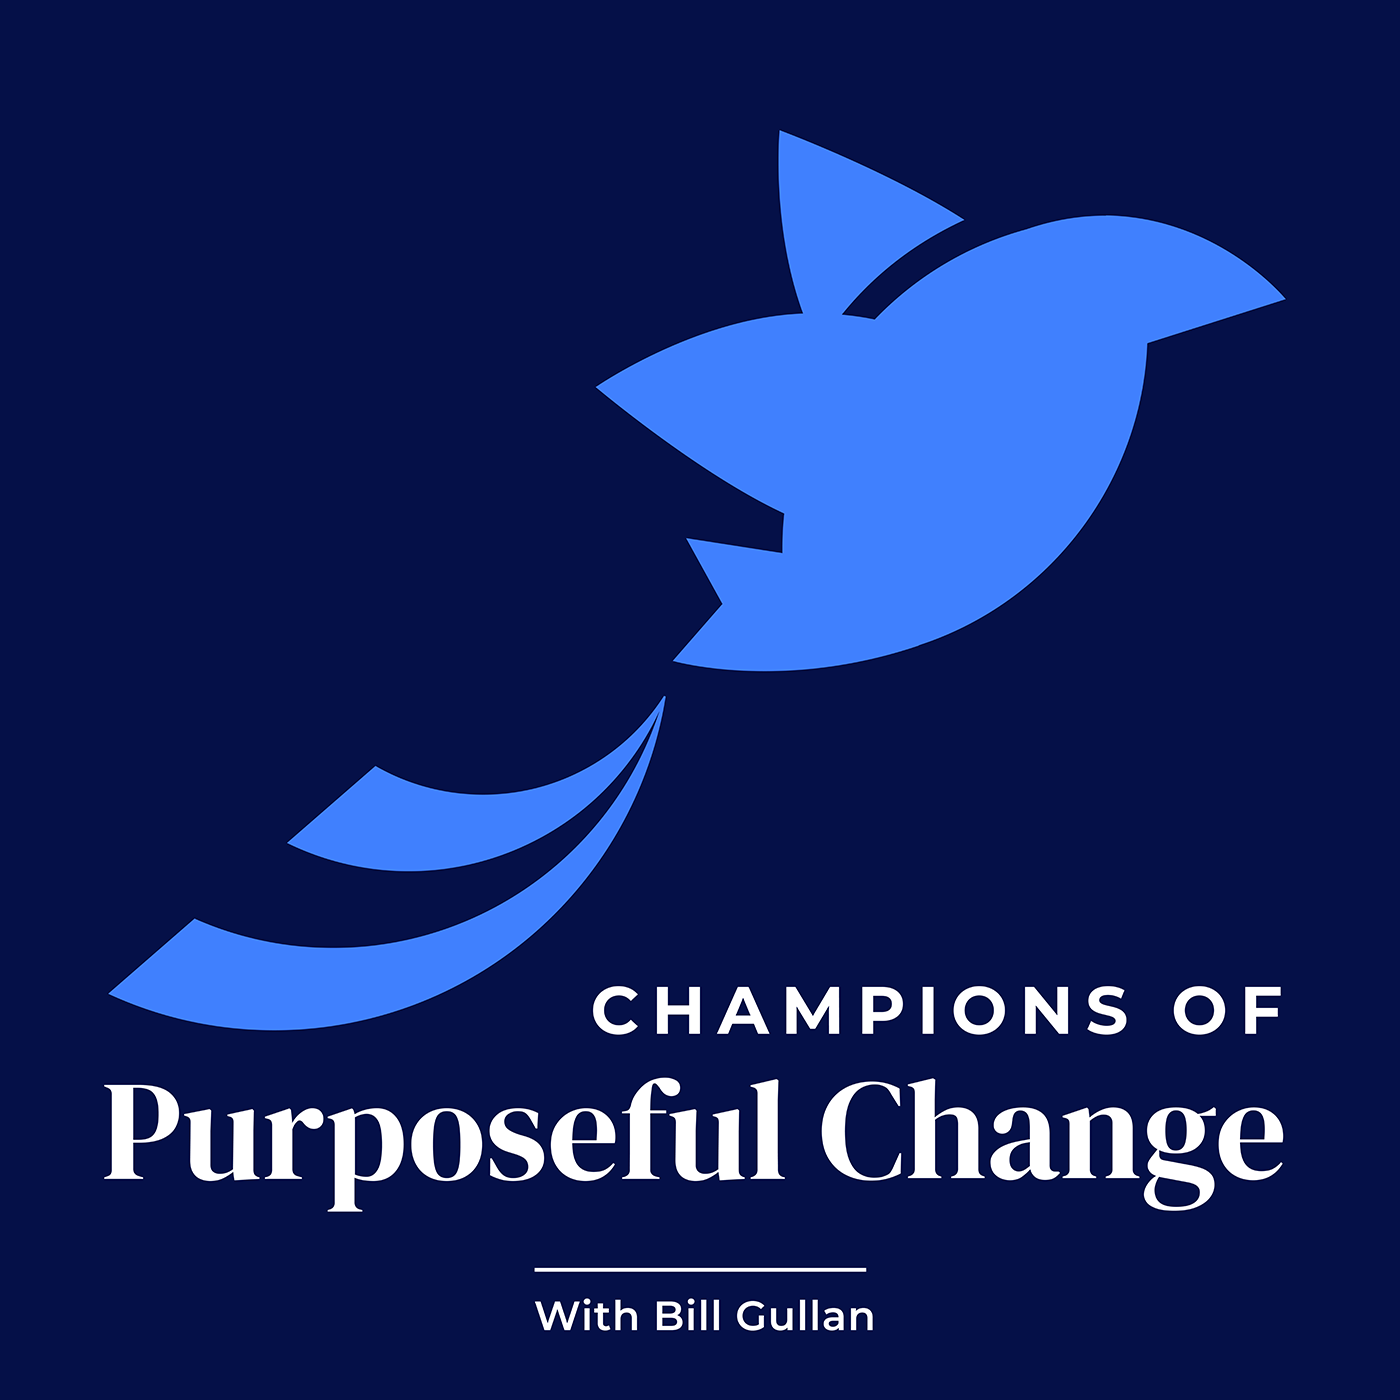 The Champions of Purposeful Change Podcast